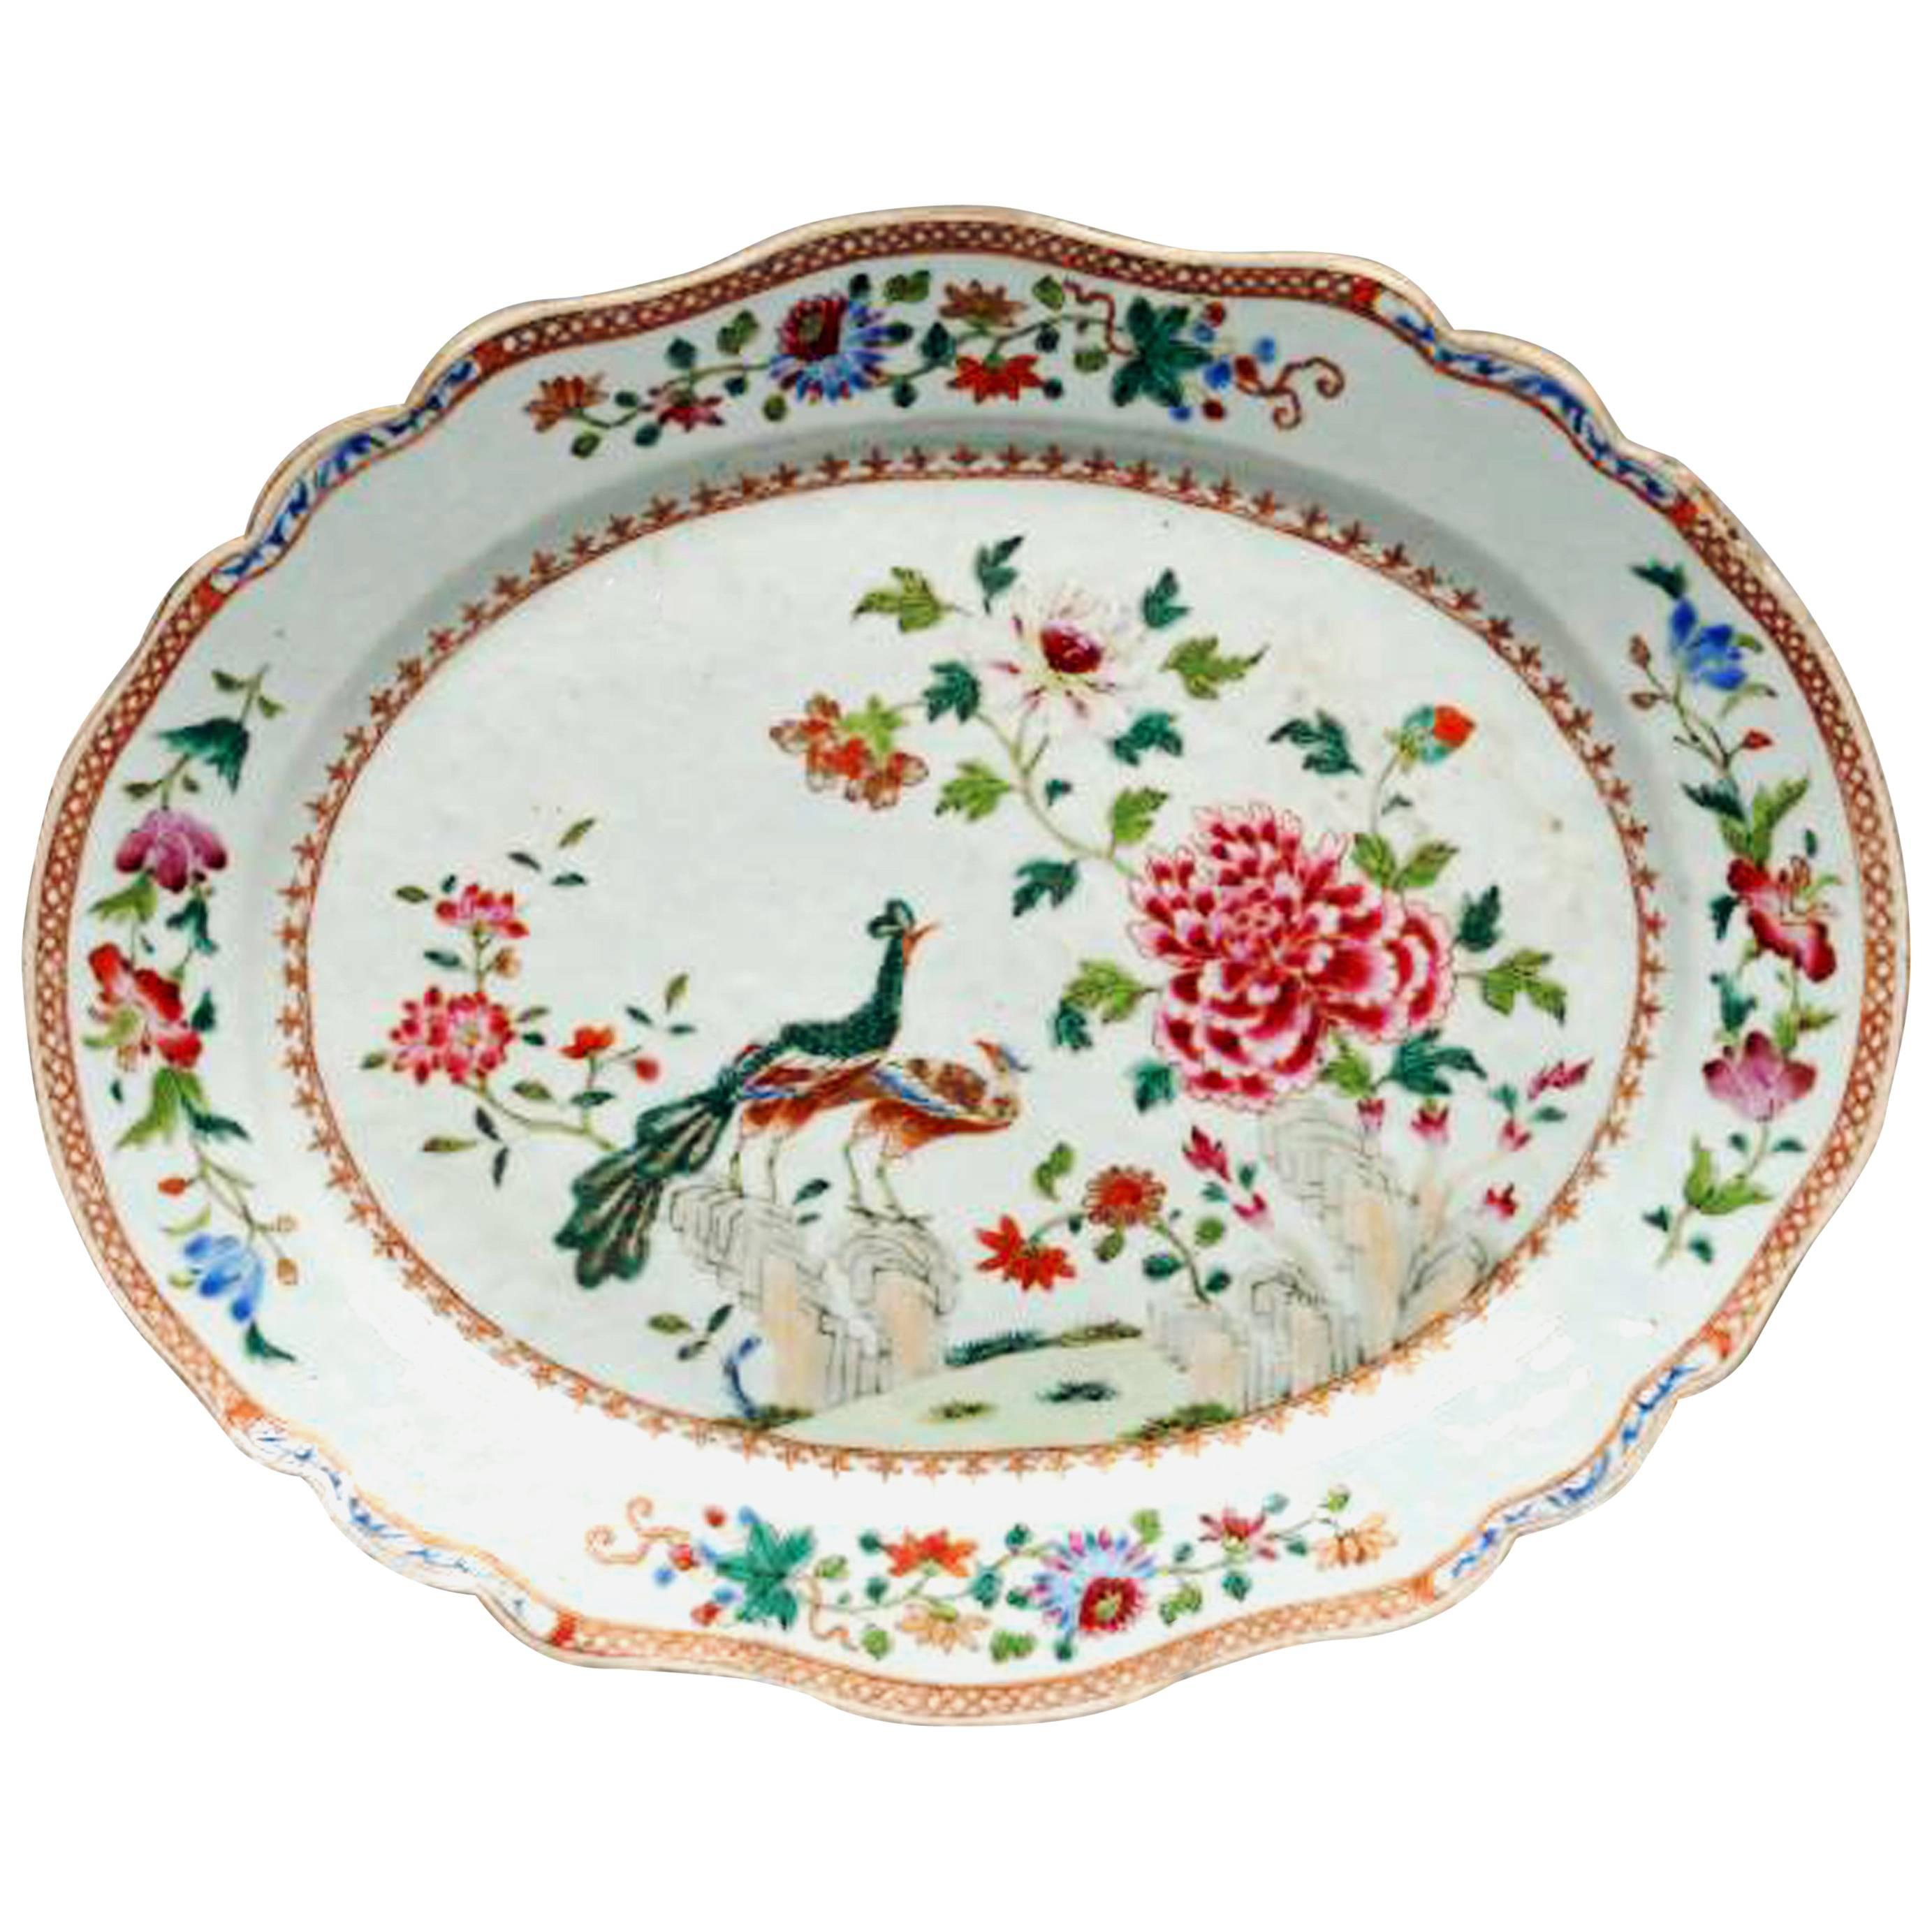 Chinese Export Famille Rose Double Peacock Shaped Porcelain Dish, circa 1765